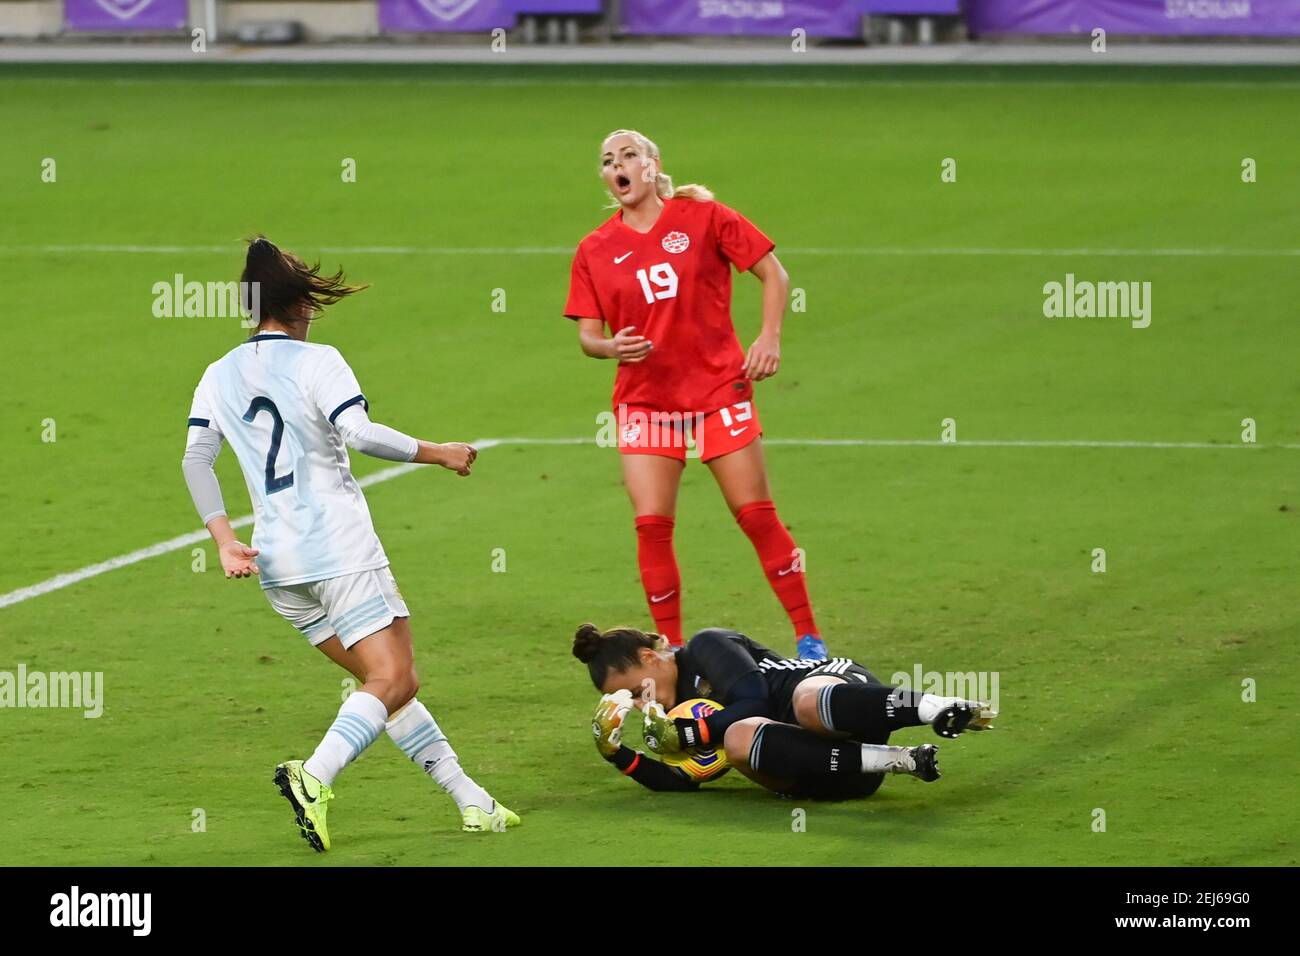 Orlando, United States. 21st Feb, 2021. Goalkeeper Laurina Oliveros (#12 Argentina) makes a save against Adriana Leon (#19 Canada) during the SheBelieves Cup International Womens match between Argentina and Canada at Exploria Stadium in Orlando, Florida. Credit: SPP Sport Press Photo. /Alamy Live News Stock Photo